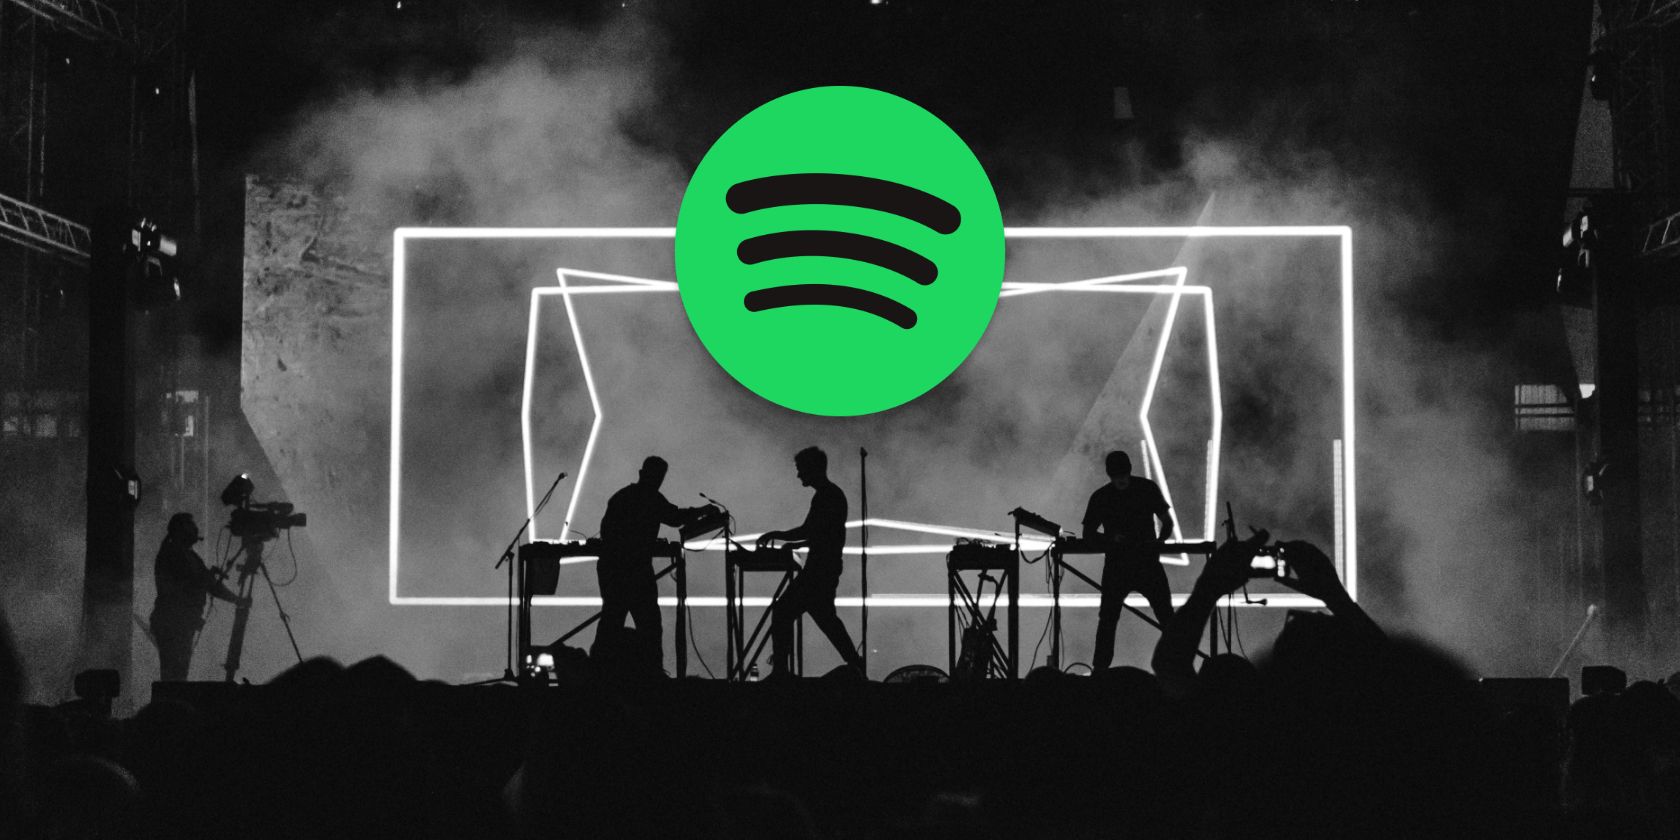 A black and white photo of a concert with the Spotify logo in the foreground.